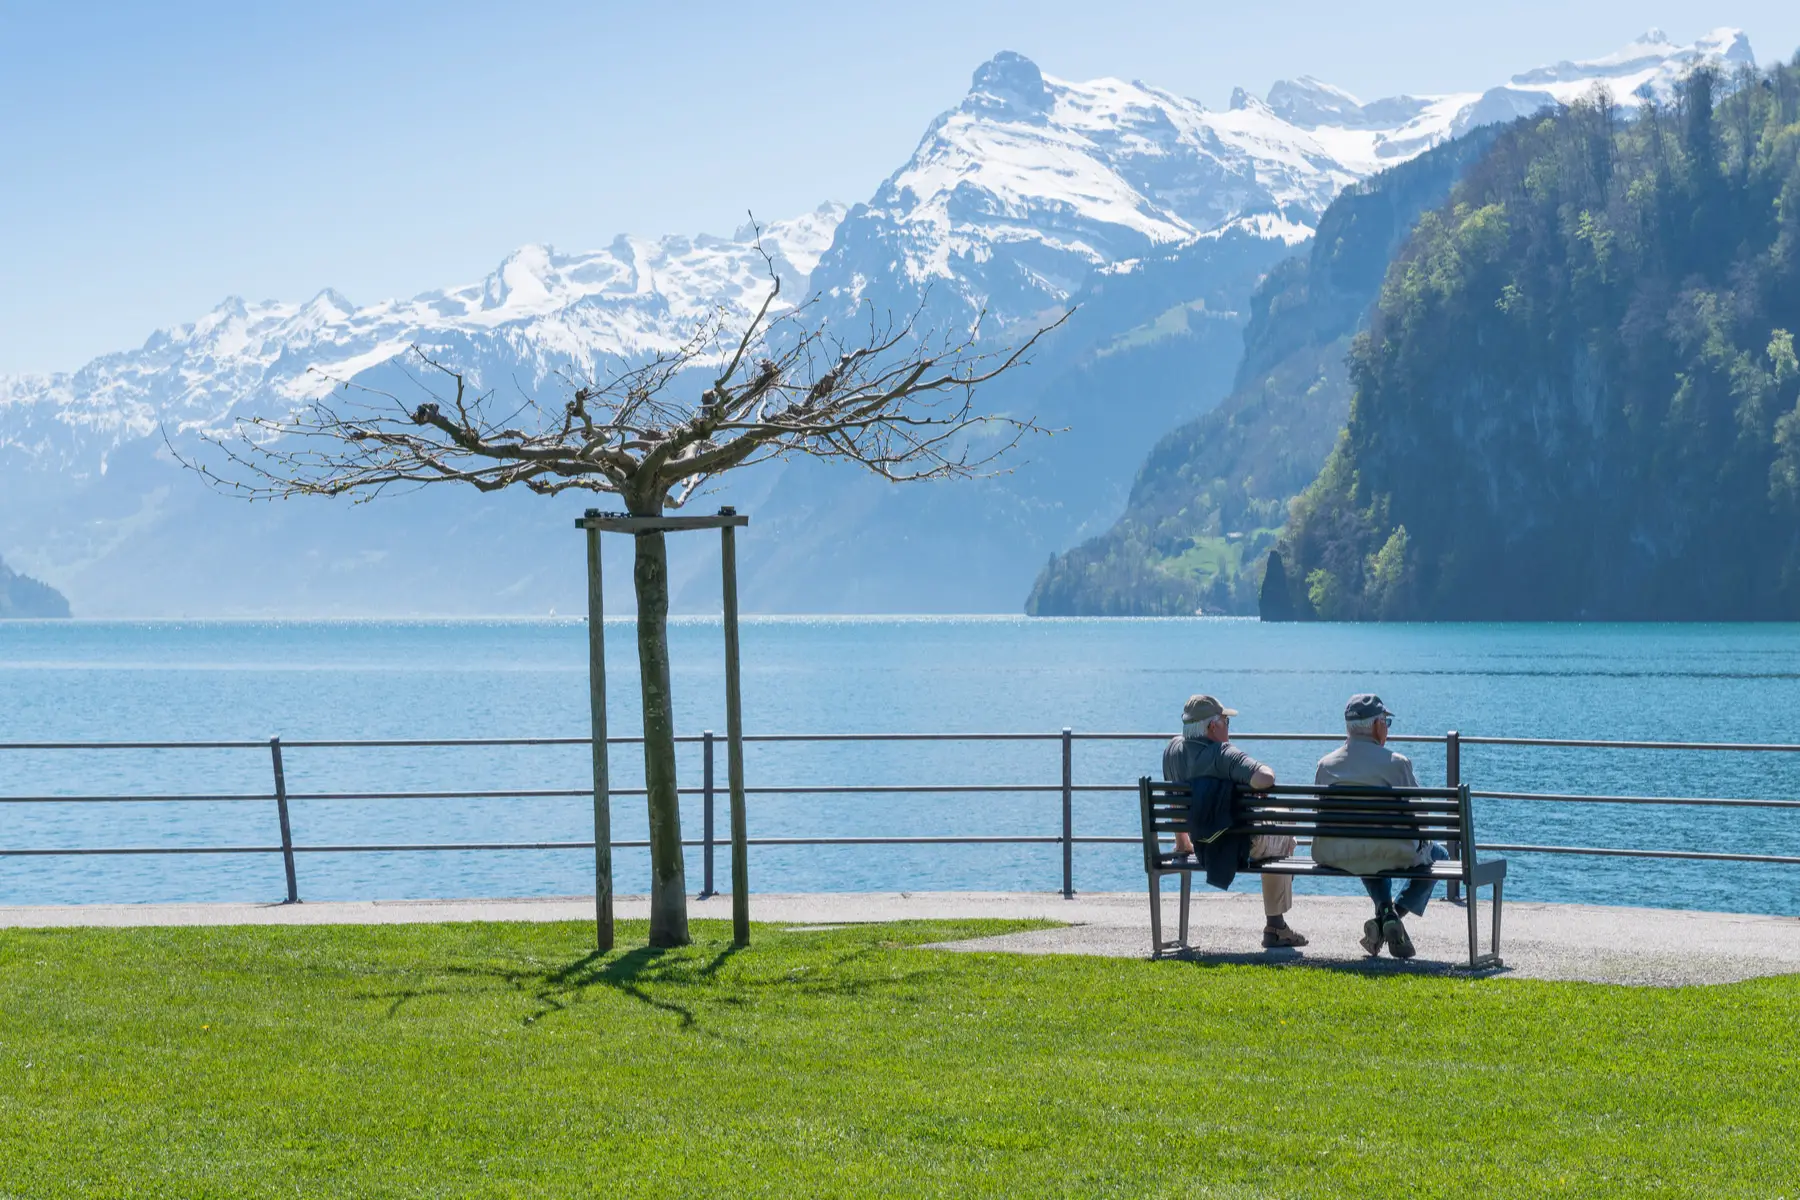 Retirees enjoying the view in the Swiss Alps